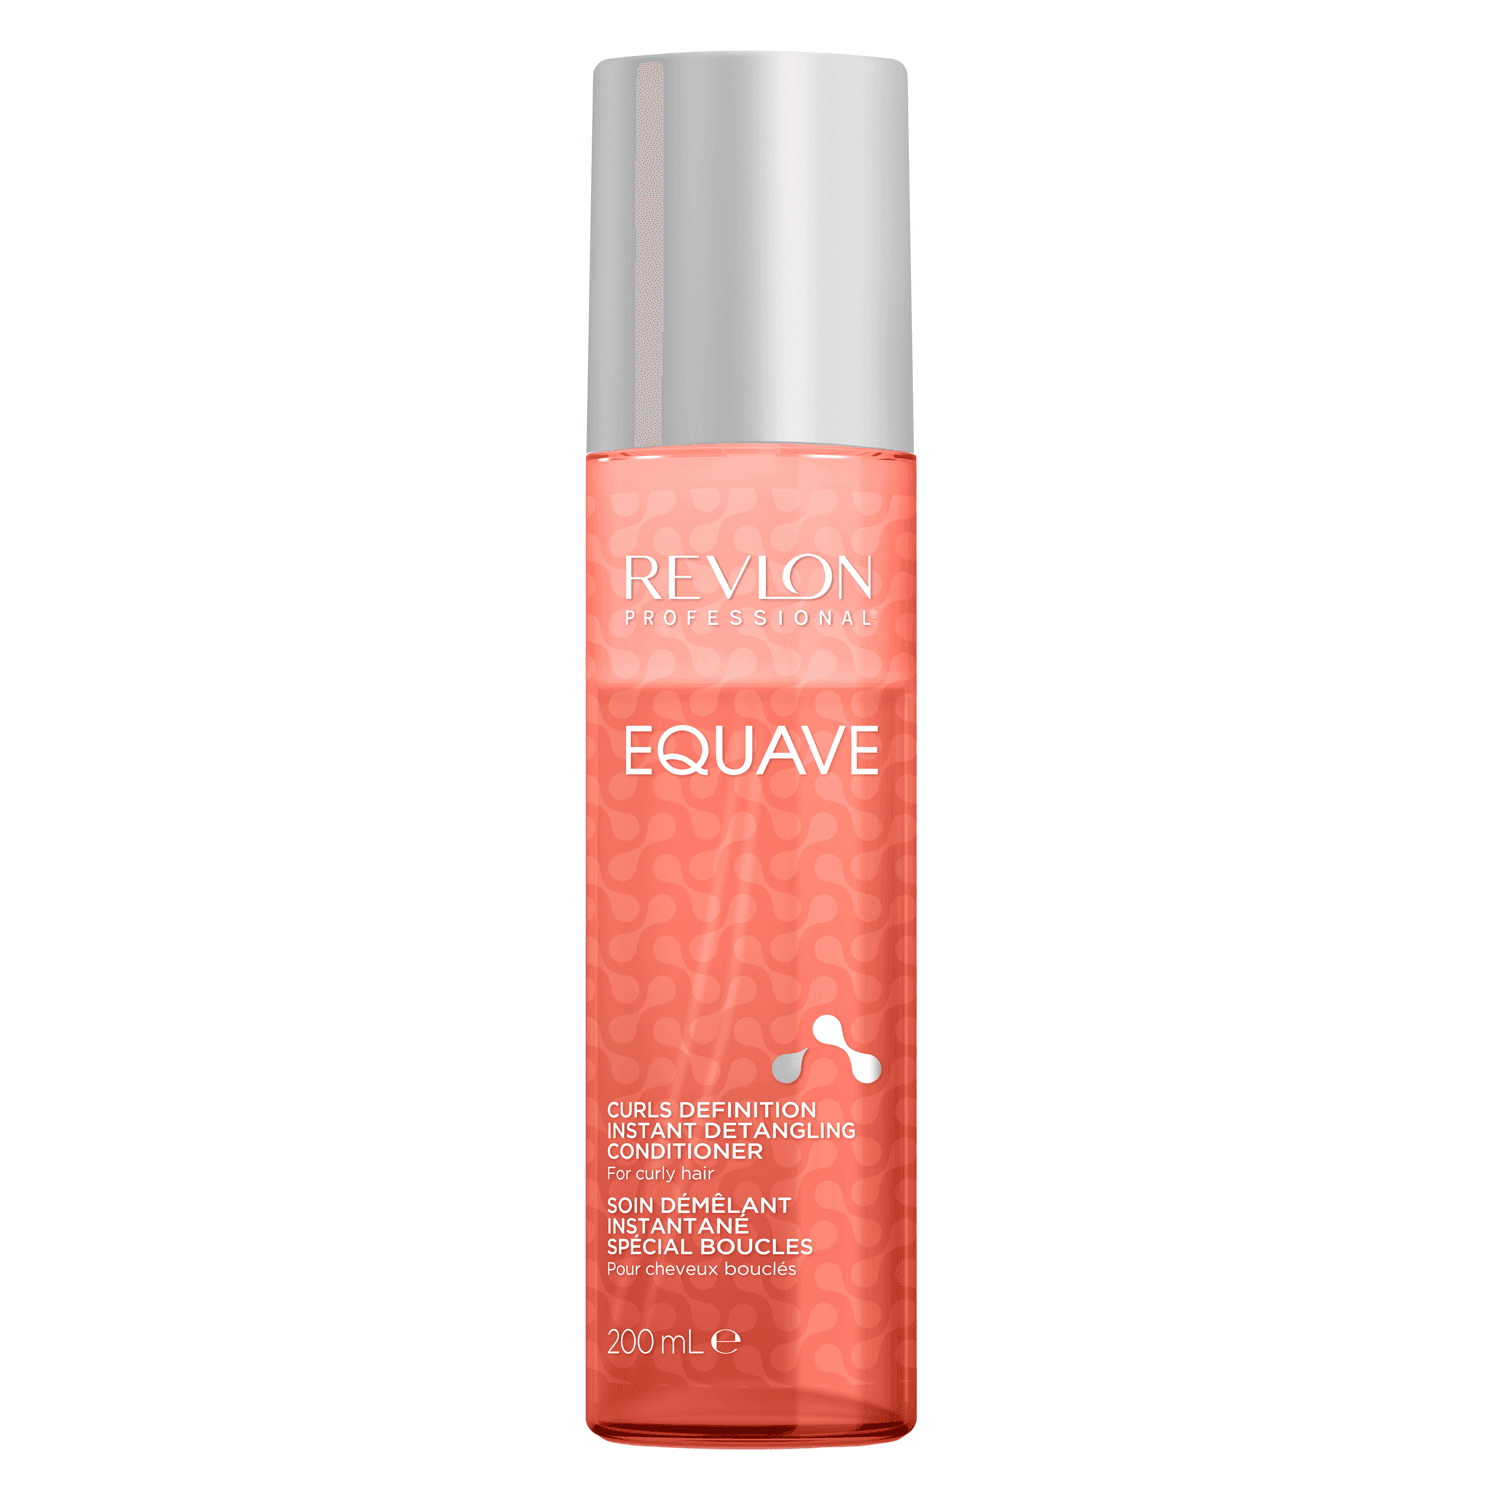 Equave - Curls Definition Leave-In Conditioner